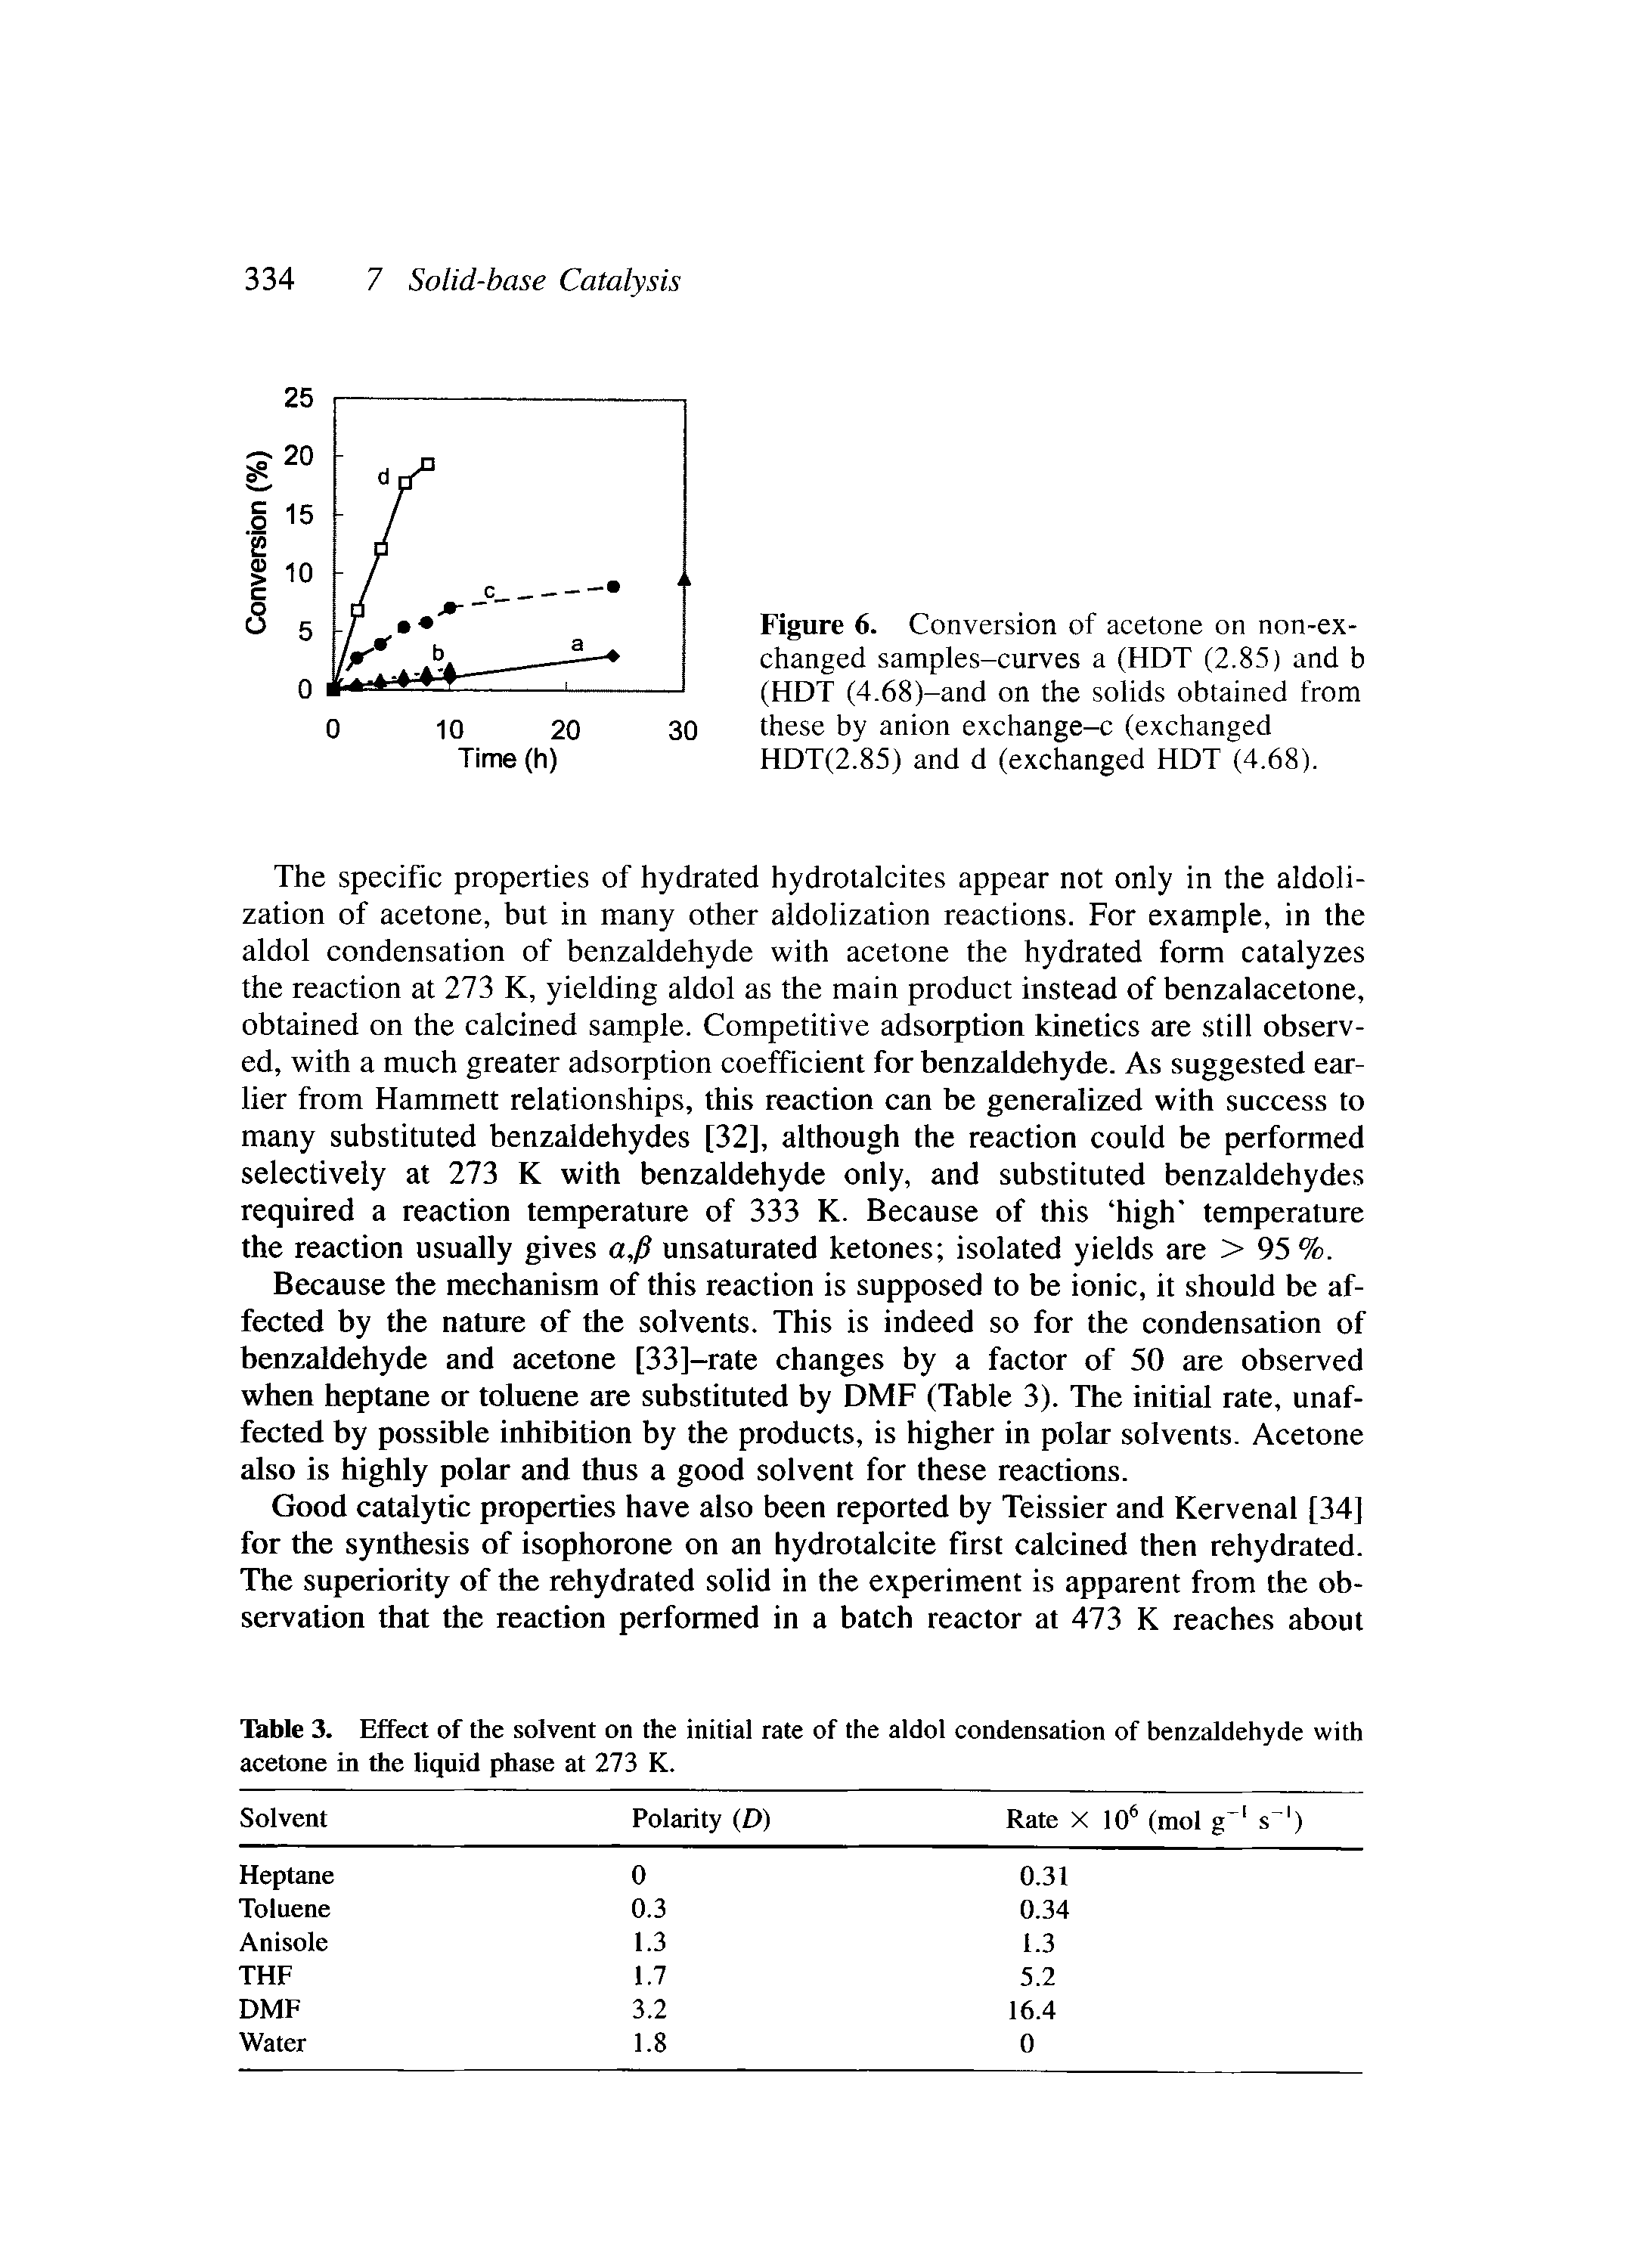 Table 3. Effect of the solvent on the initial rate of the aldol condensation of benzaldehyde with acetone in the liquid phase at 273 K.